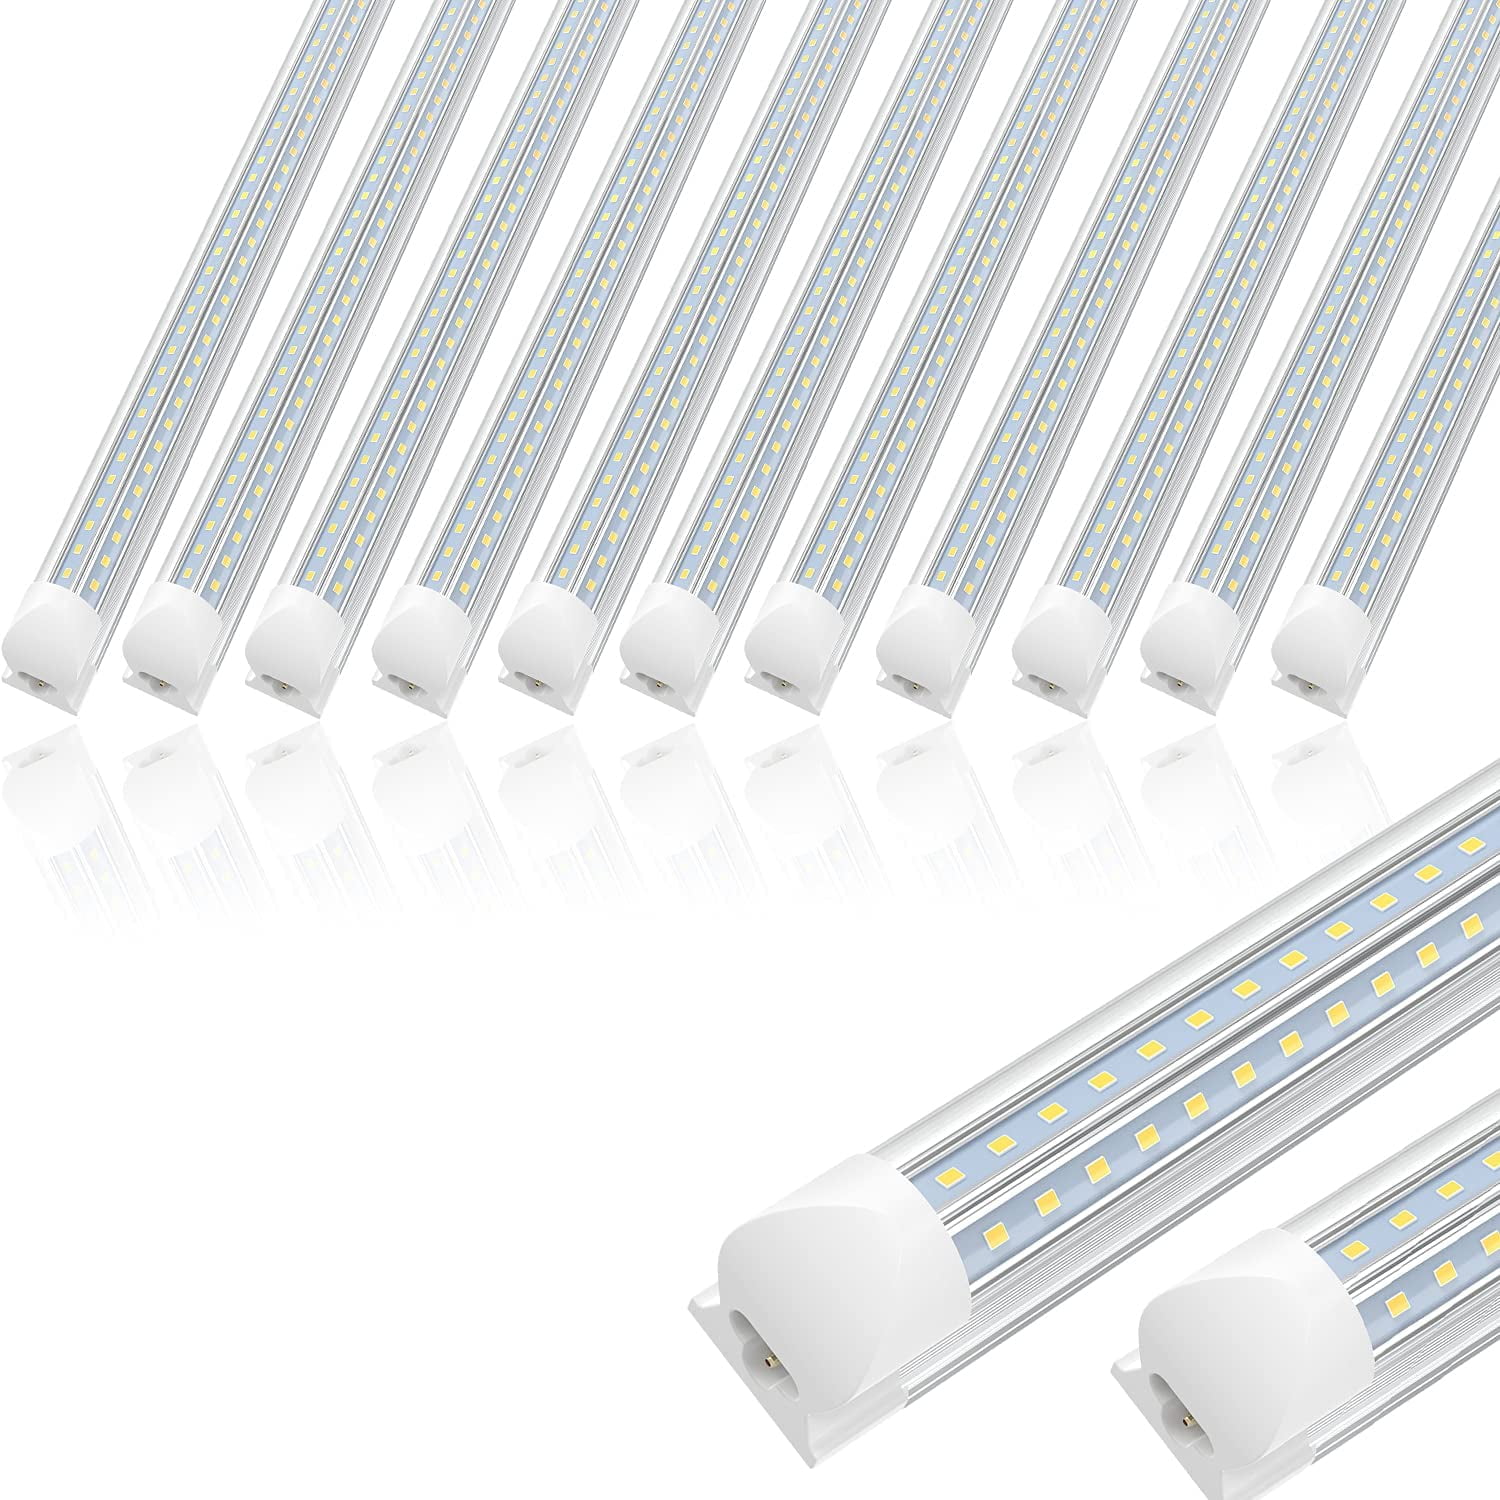 The Link Special Items New Items Lights 10 Pack of 72W 8FT LED light 